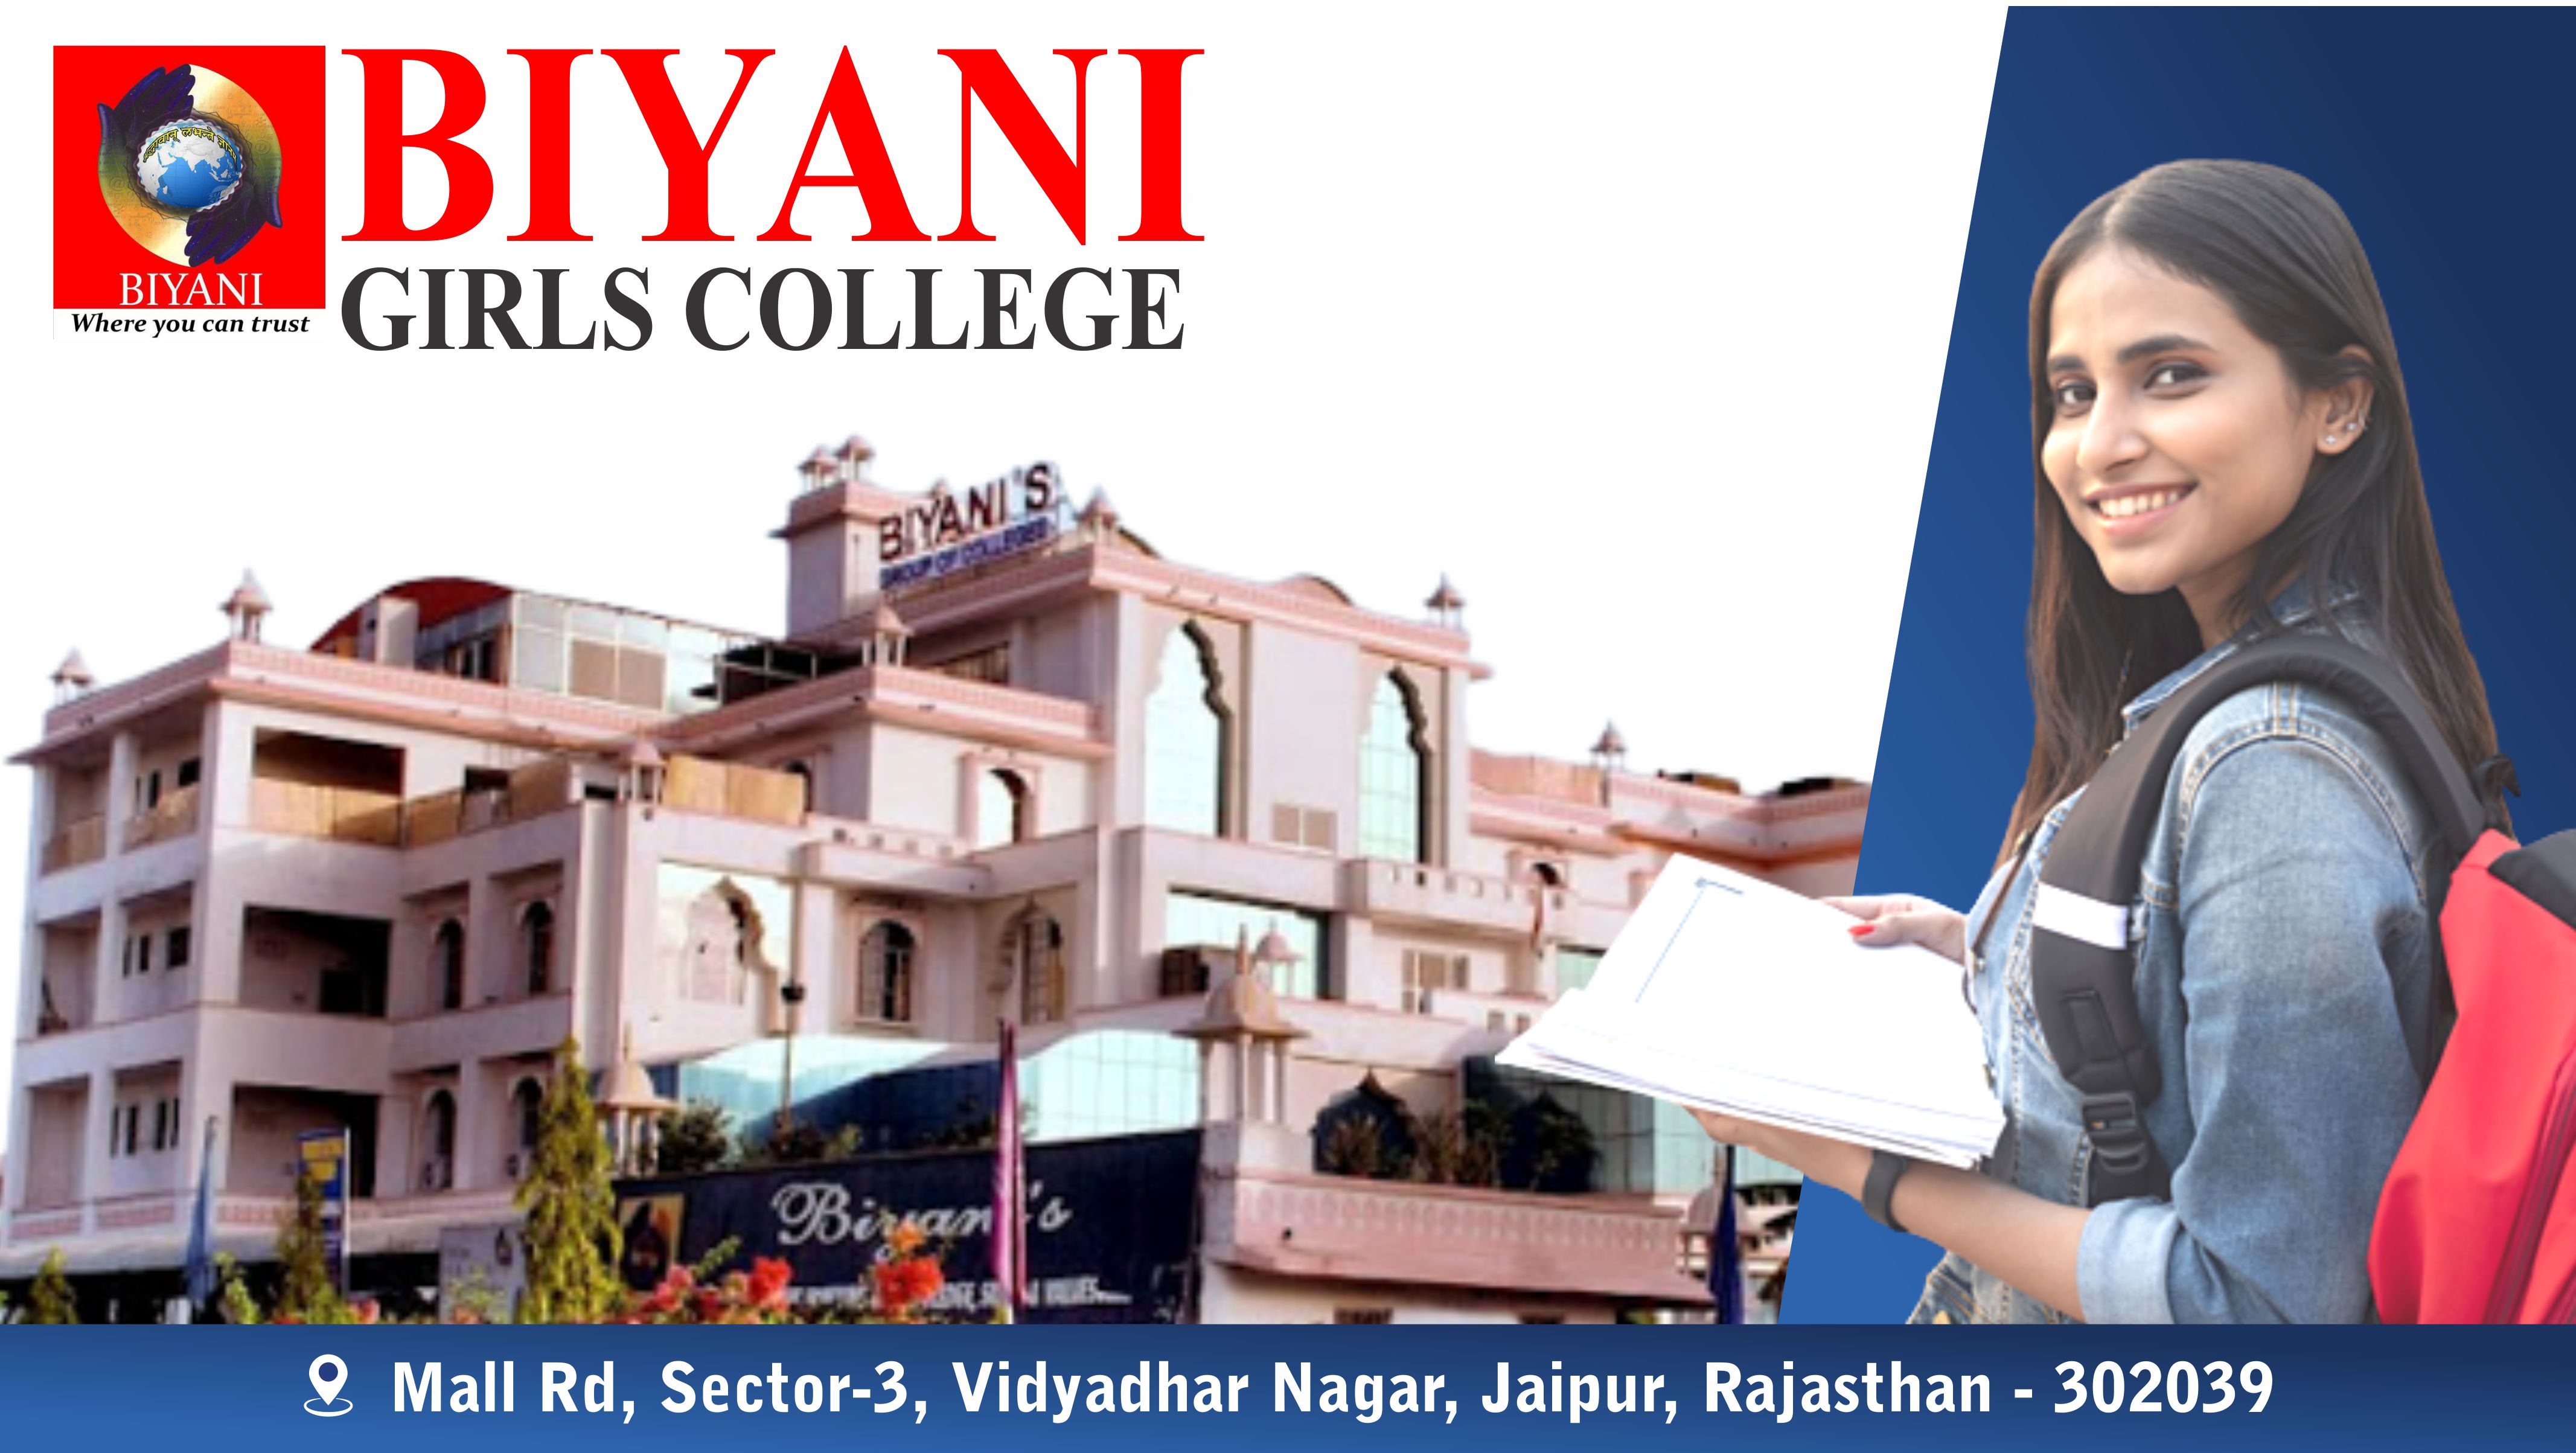 Out Side View of Biyani Girls College